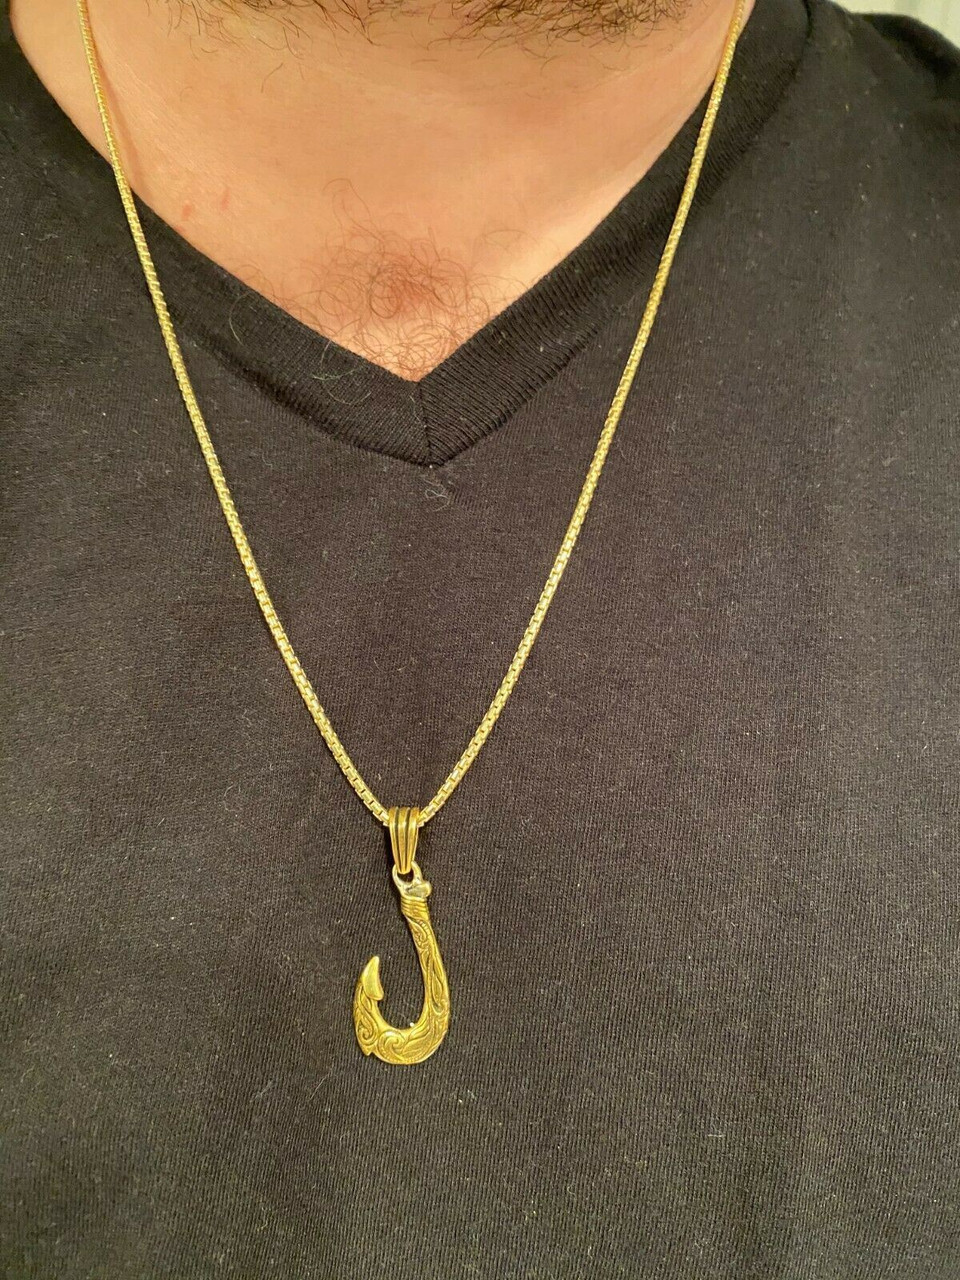 https://cdn11.bigcommerce.com/s-s8inshvd4z/images/stencil/original/products/4337/53945/real-solid-925-sterling-silver-hawaiian-fishing-hook-large-mens-necklace-gold__05213.1664371691.jpg?c=2